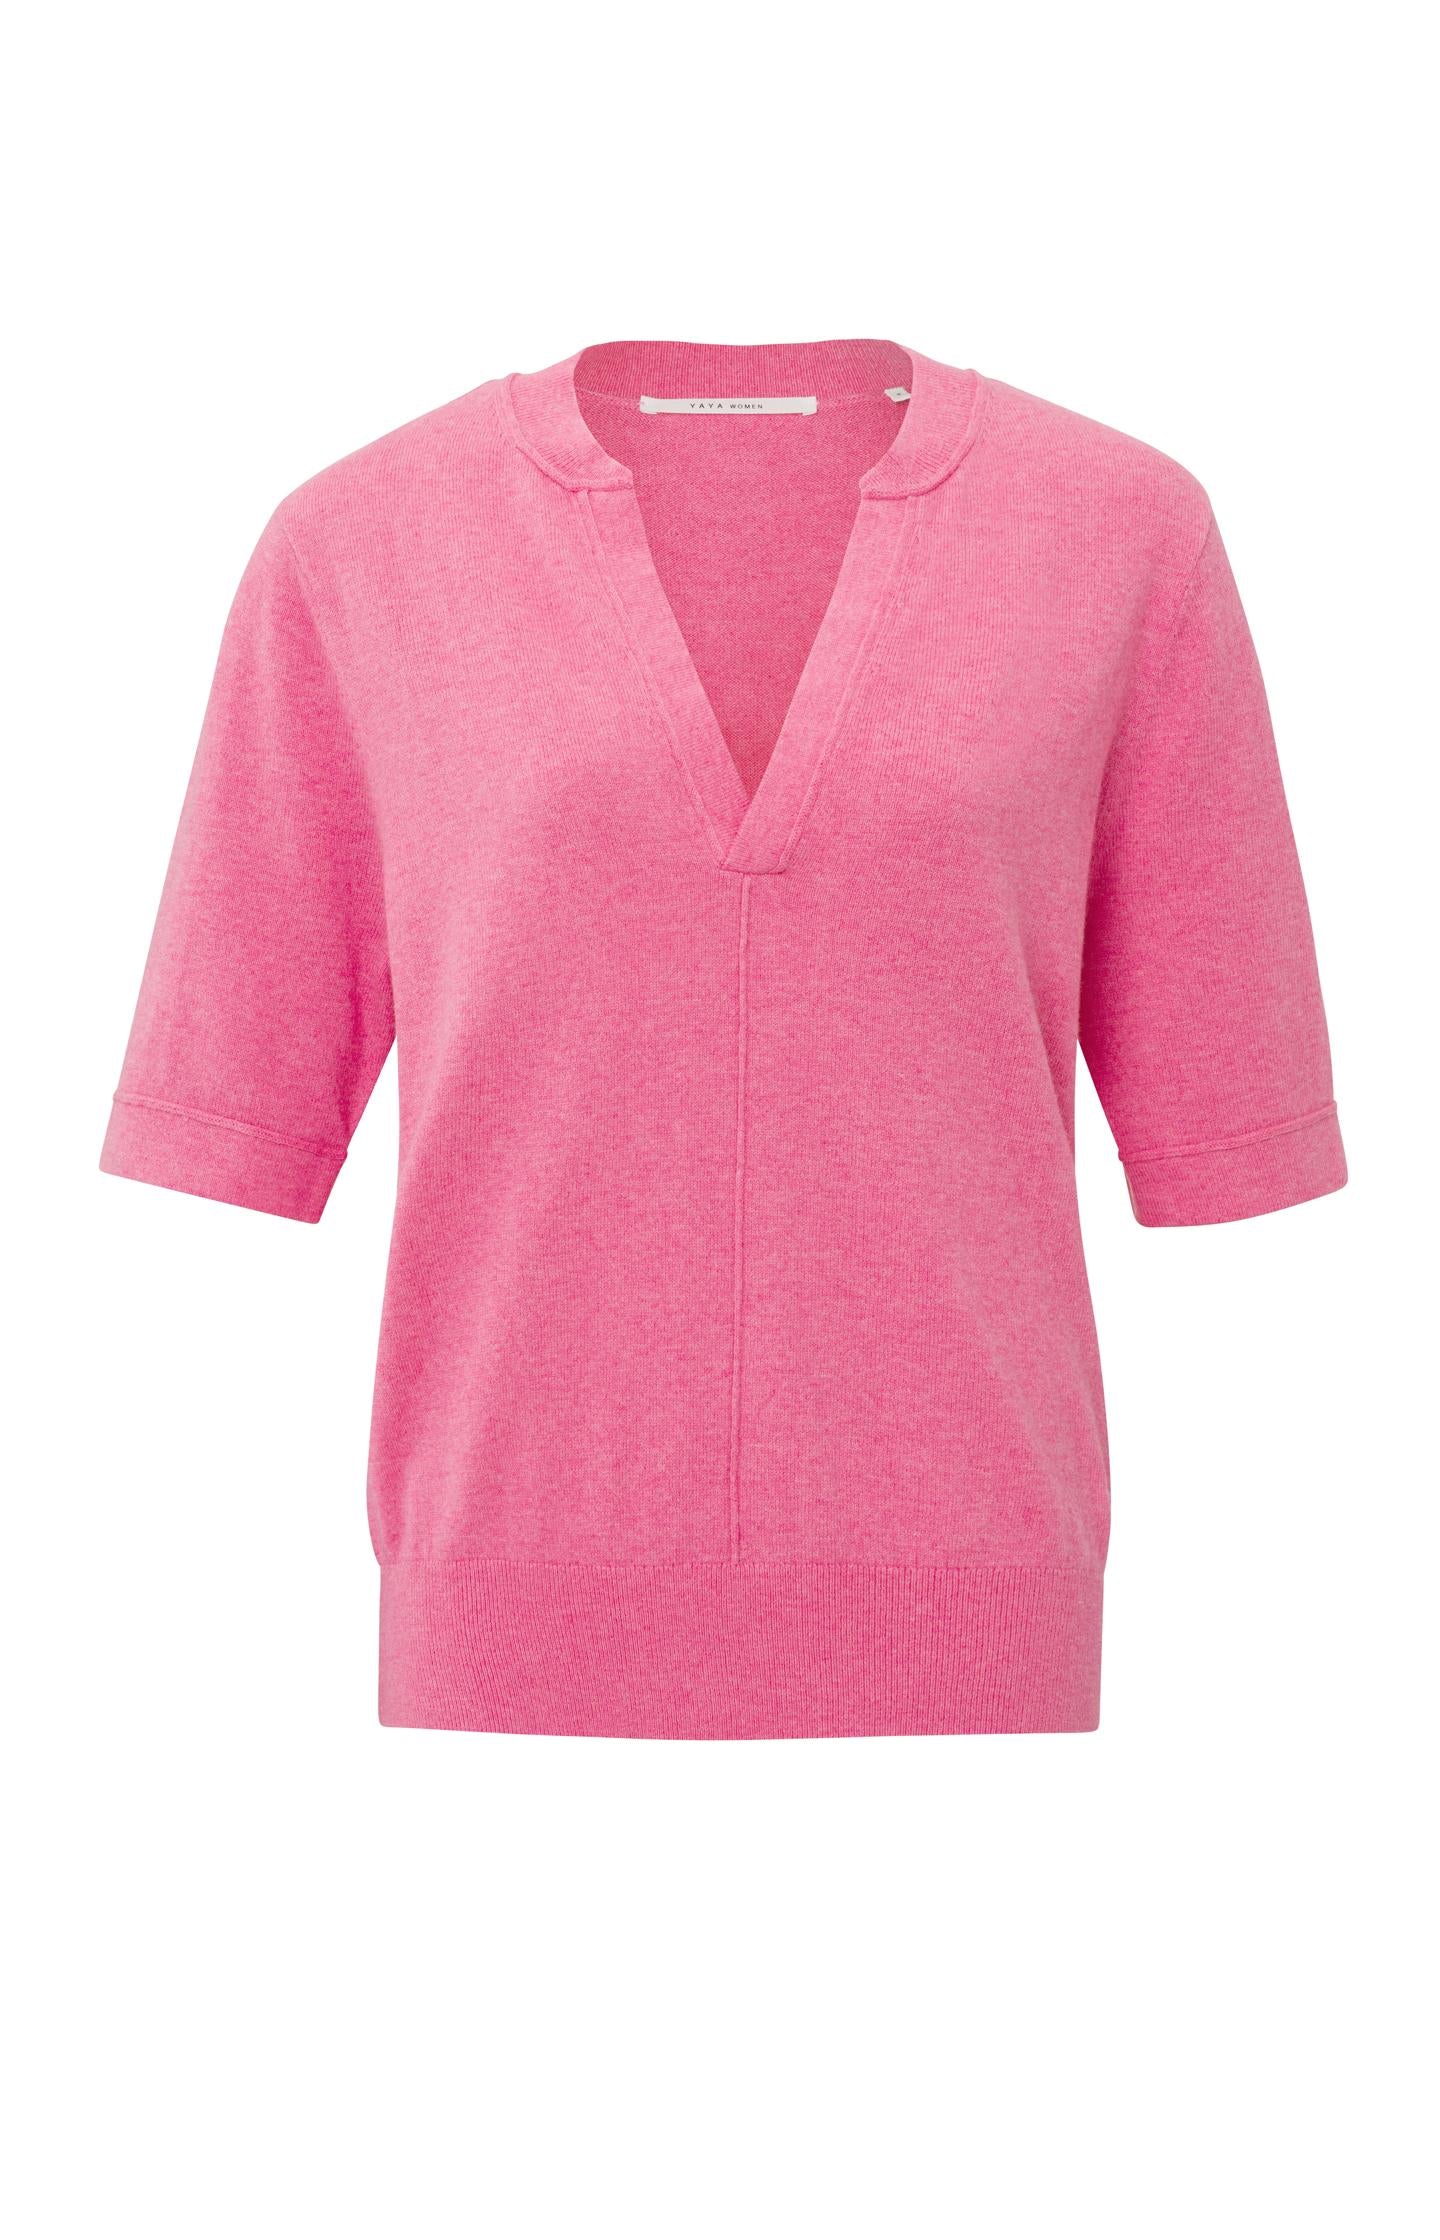 Sweater with V-neck, mid-length sleeves and seam details - Type: product